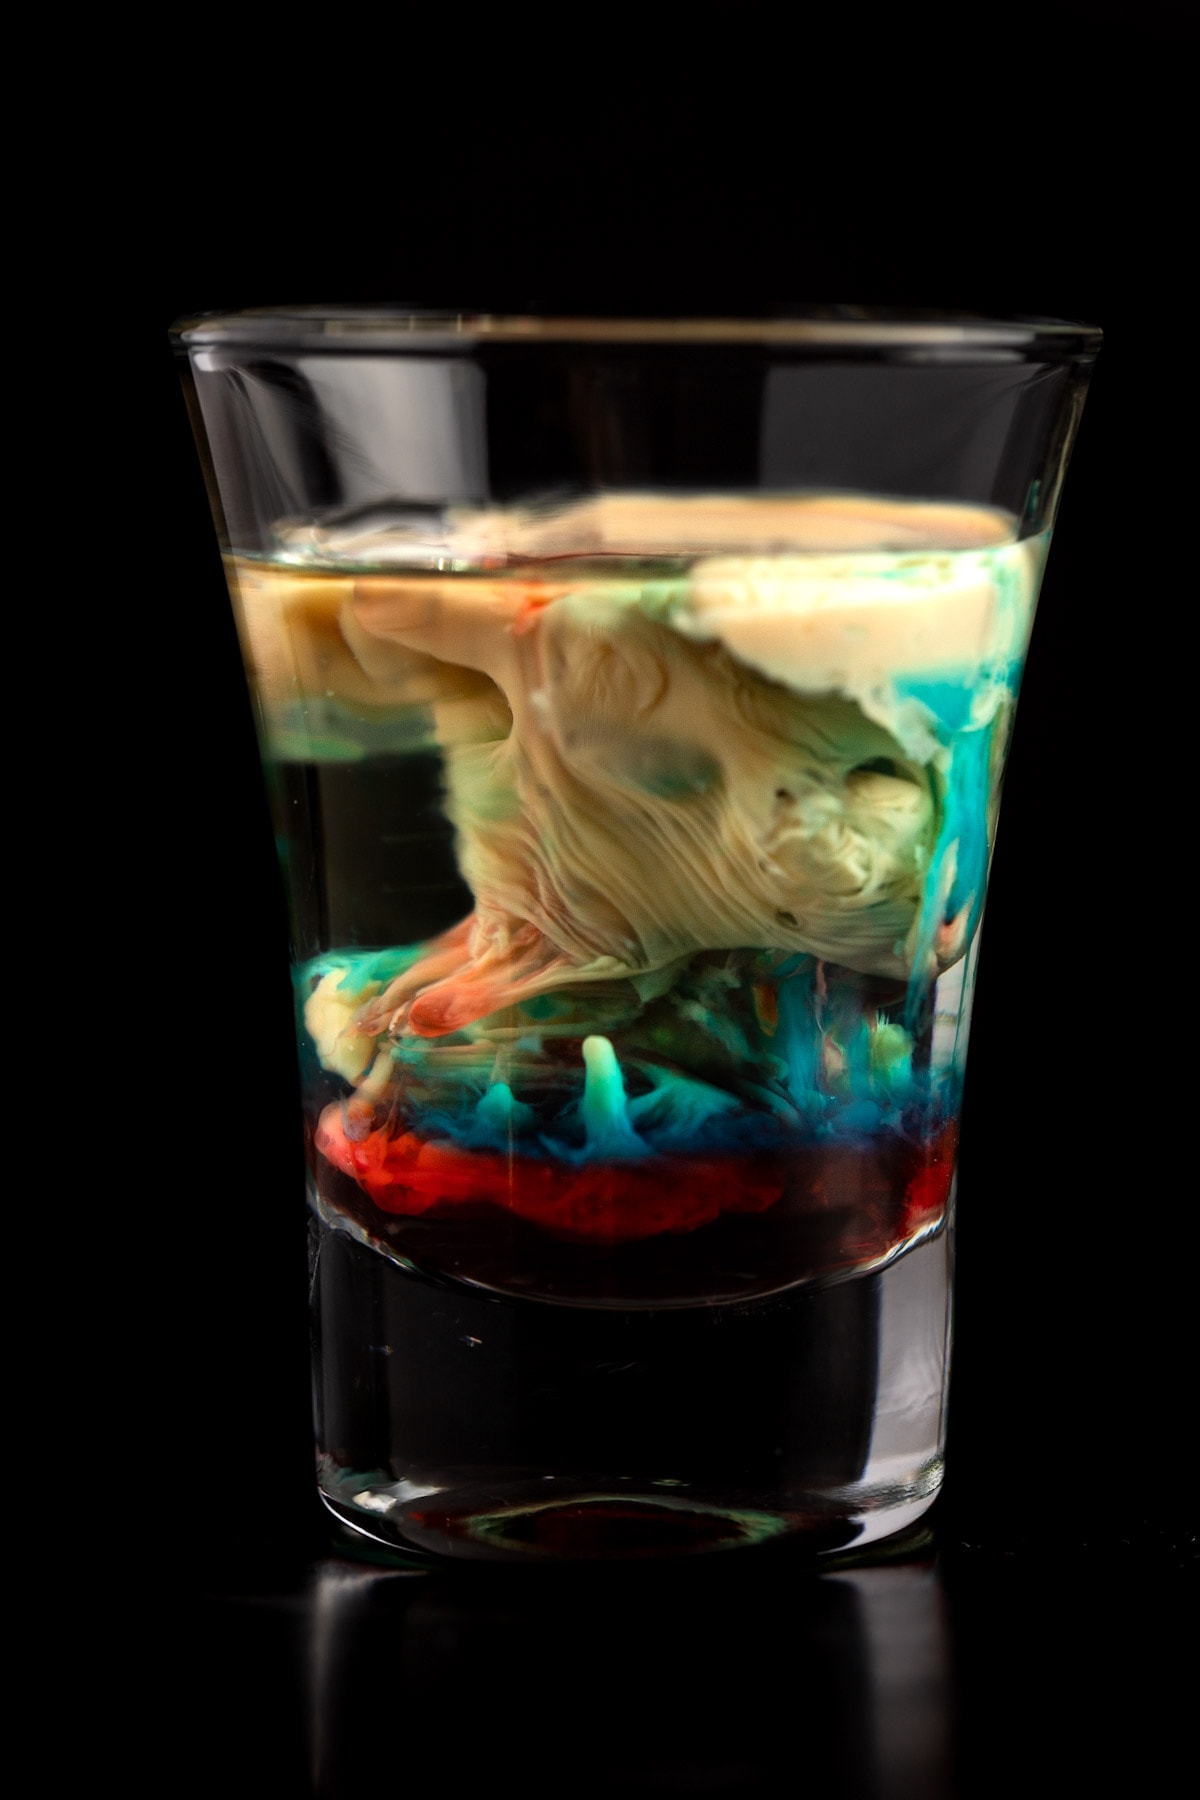 Up close view of the alien brain hemorrhage shot on a black background.